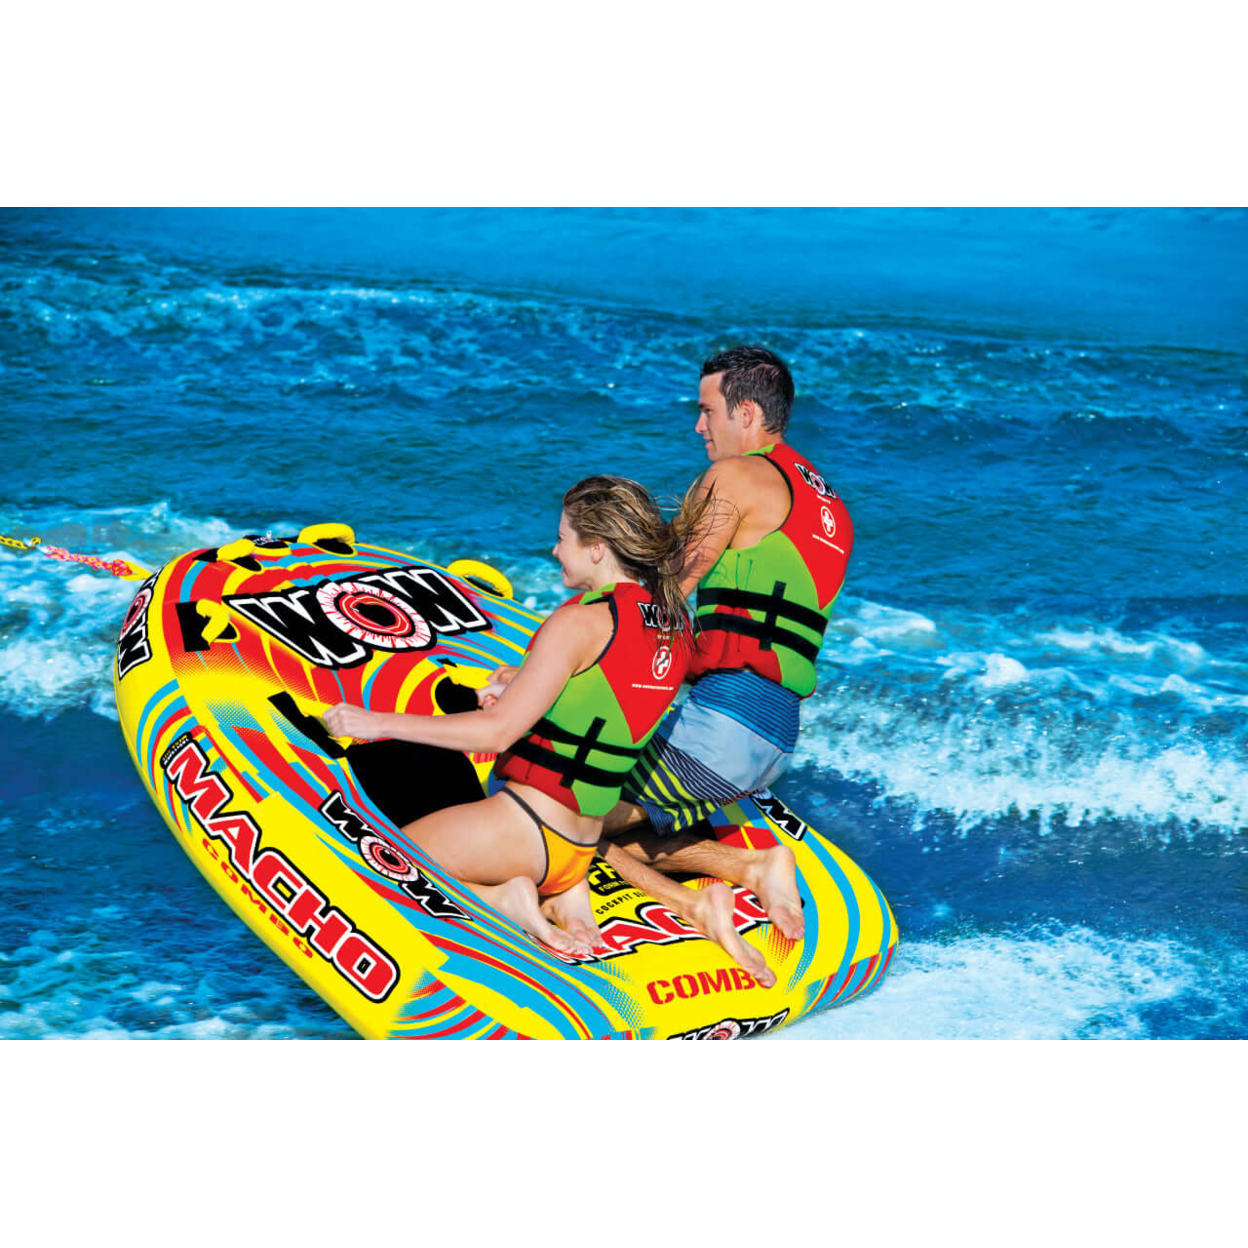 WOW Sports Macho 2 Person Towable Water Tube For Pool And Lake (16-1010)